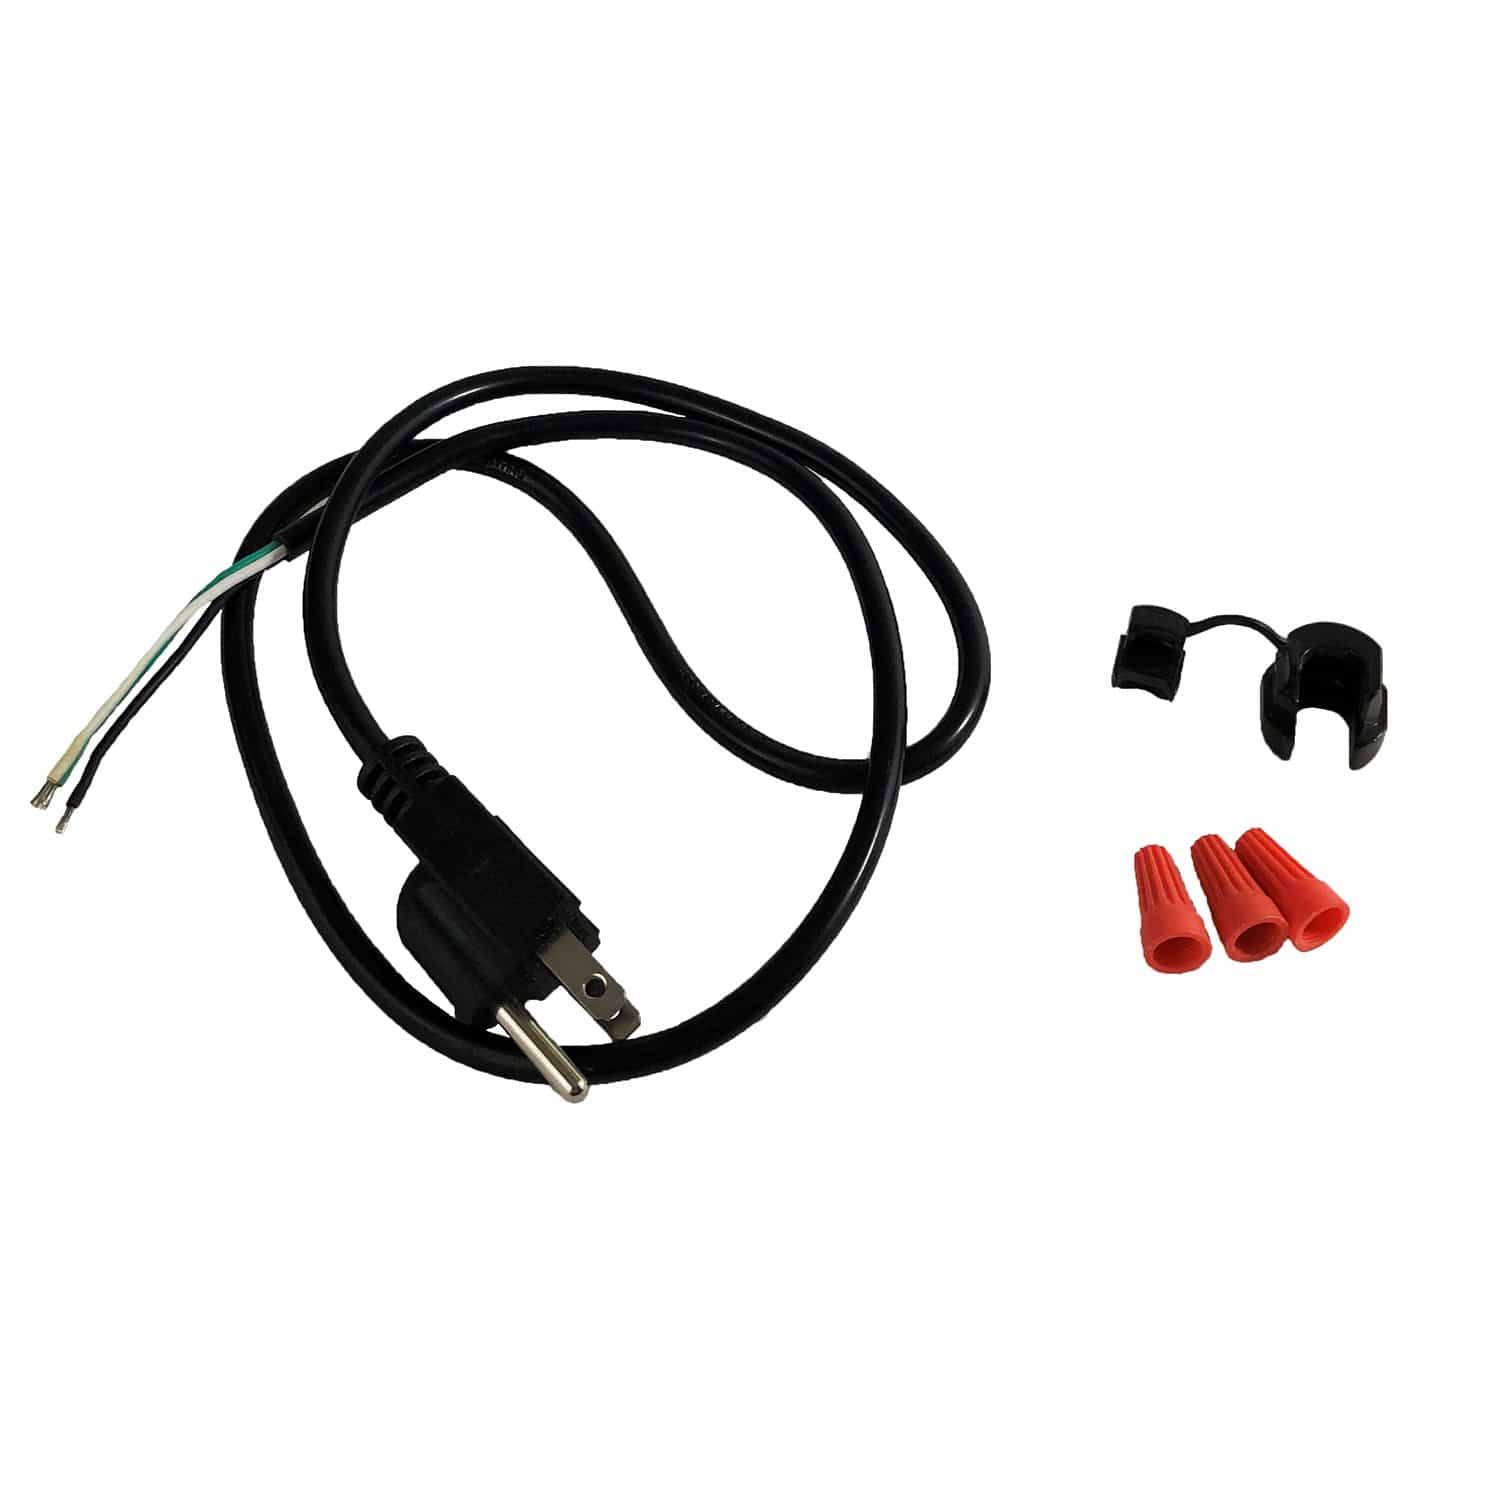 Atwood 30623 Cord Assembly Kit